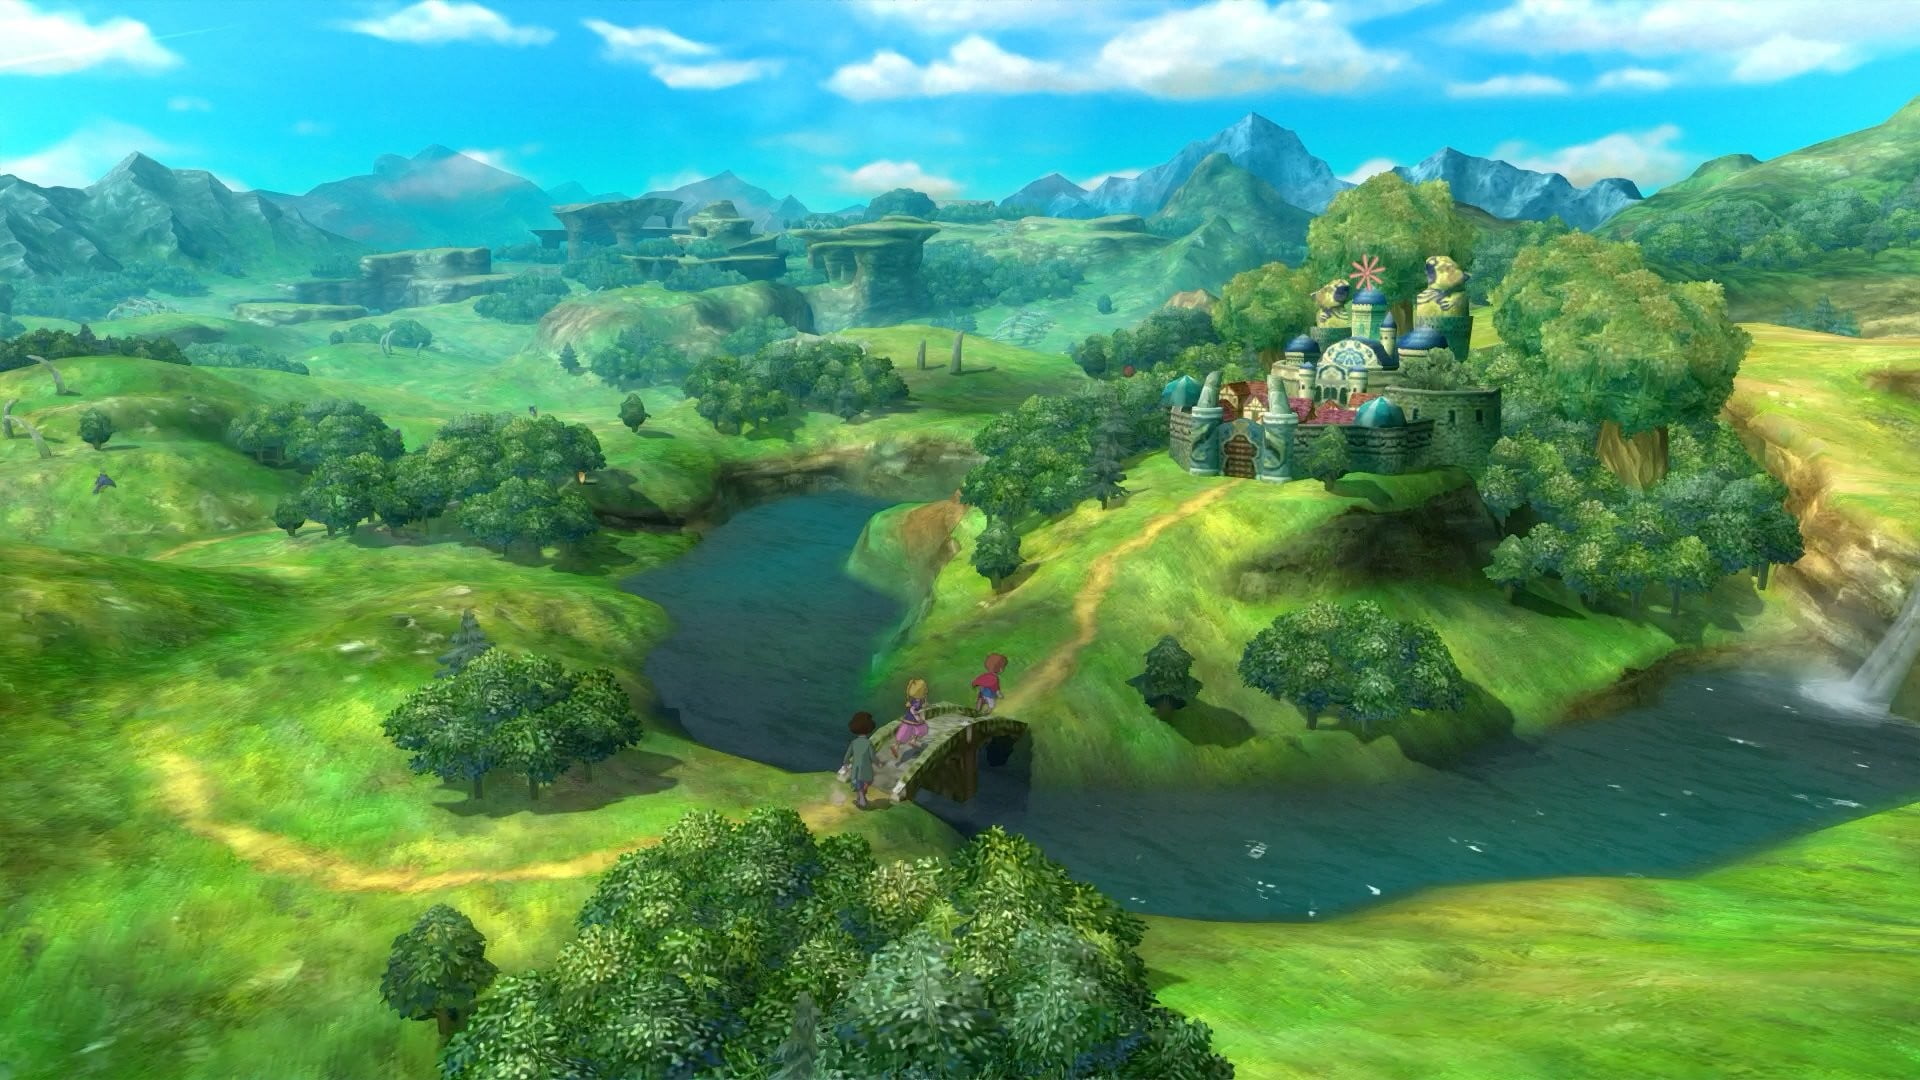 Top Anime Games - Ni No Kuni: Wrath of the White Witch